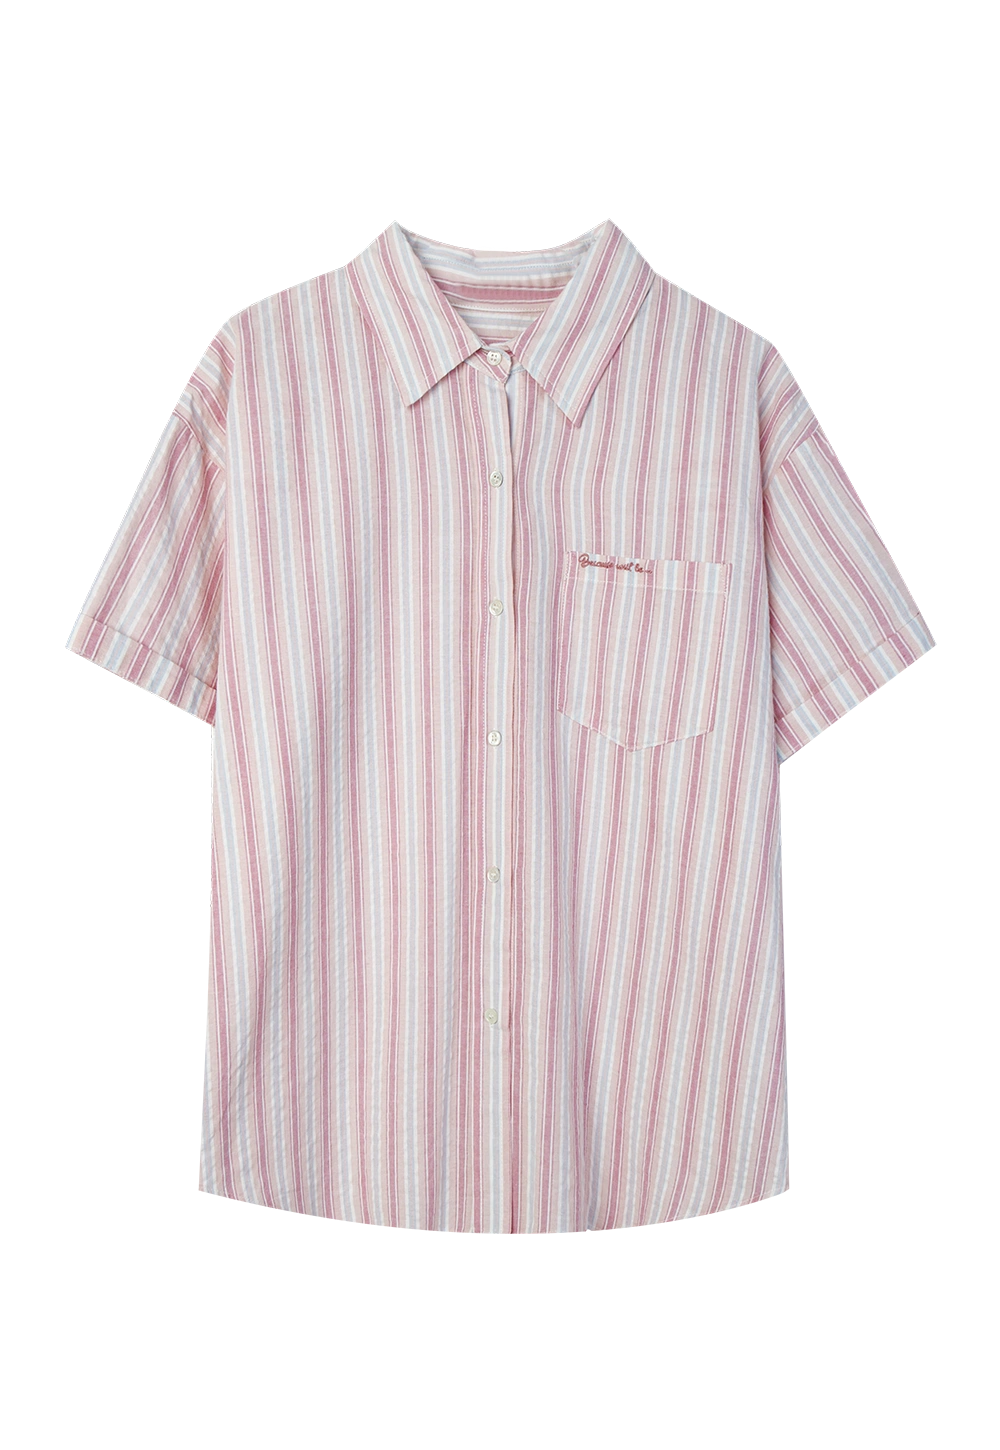 Women's Casual Striped Short Sleeve Shirt, Front Pocket - Perfect for Summer